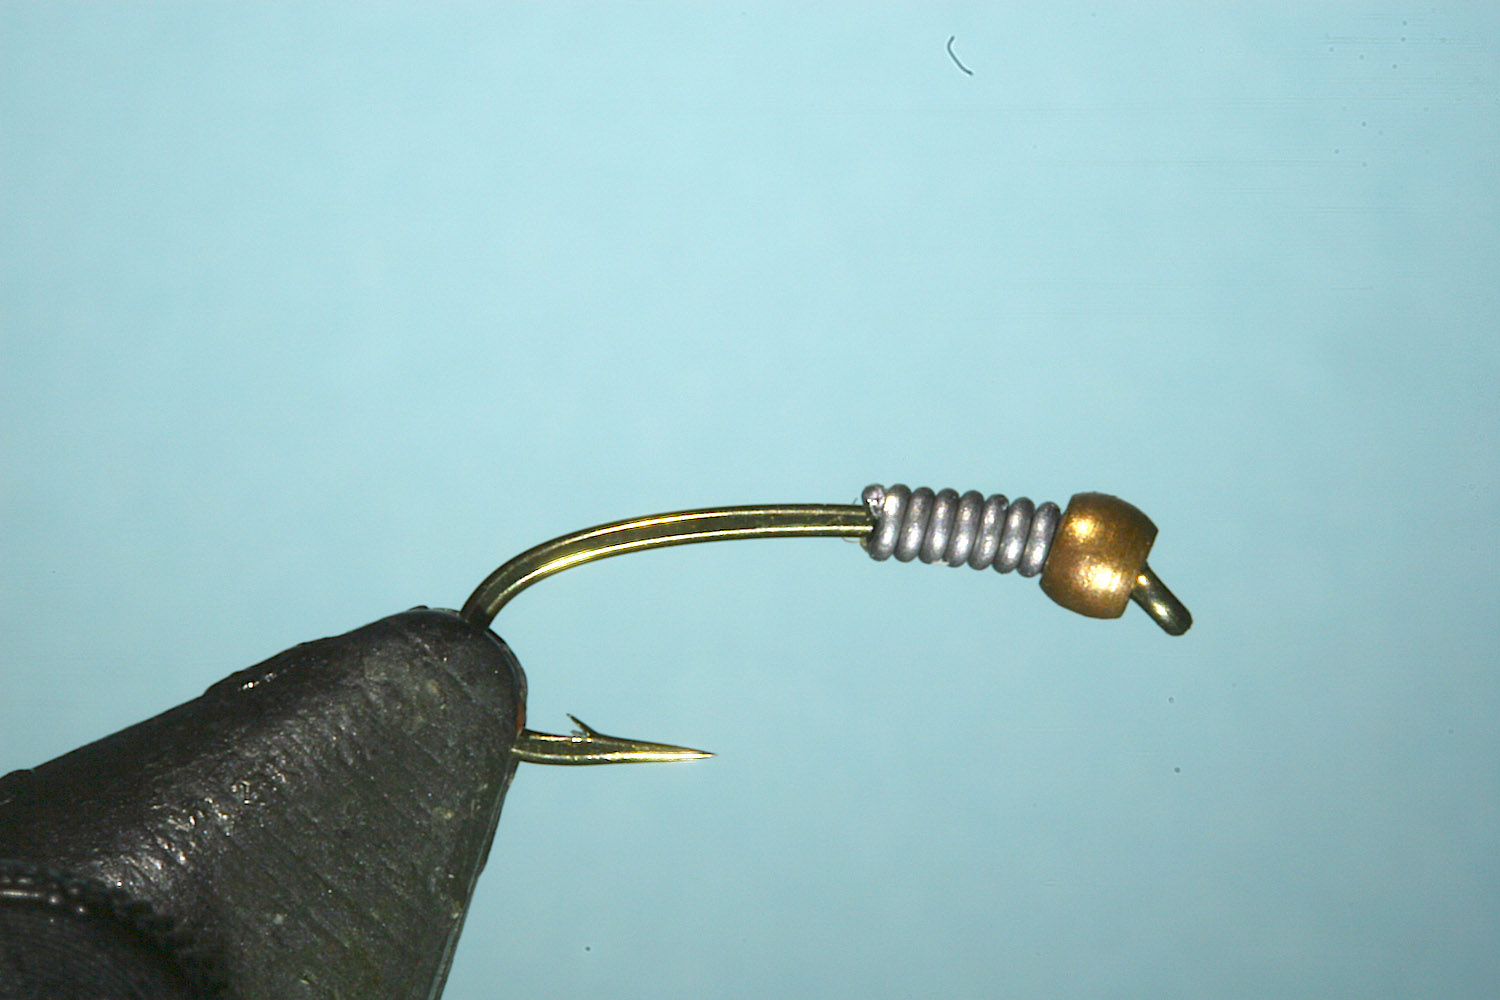 Step 2 of tying sequence for jelly crimp nymph fly